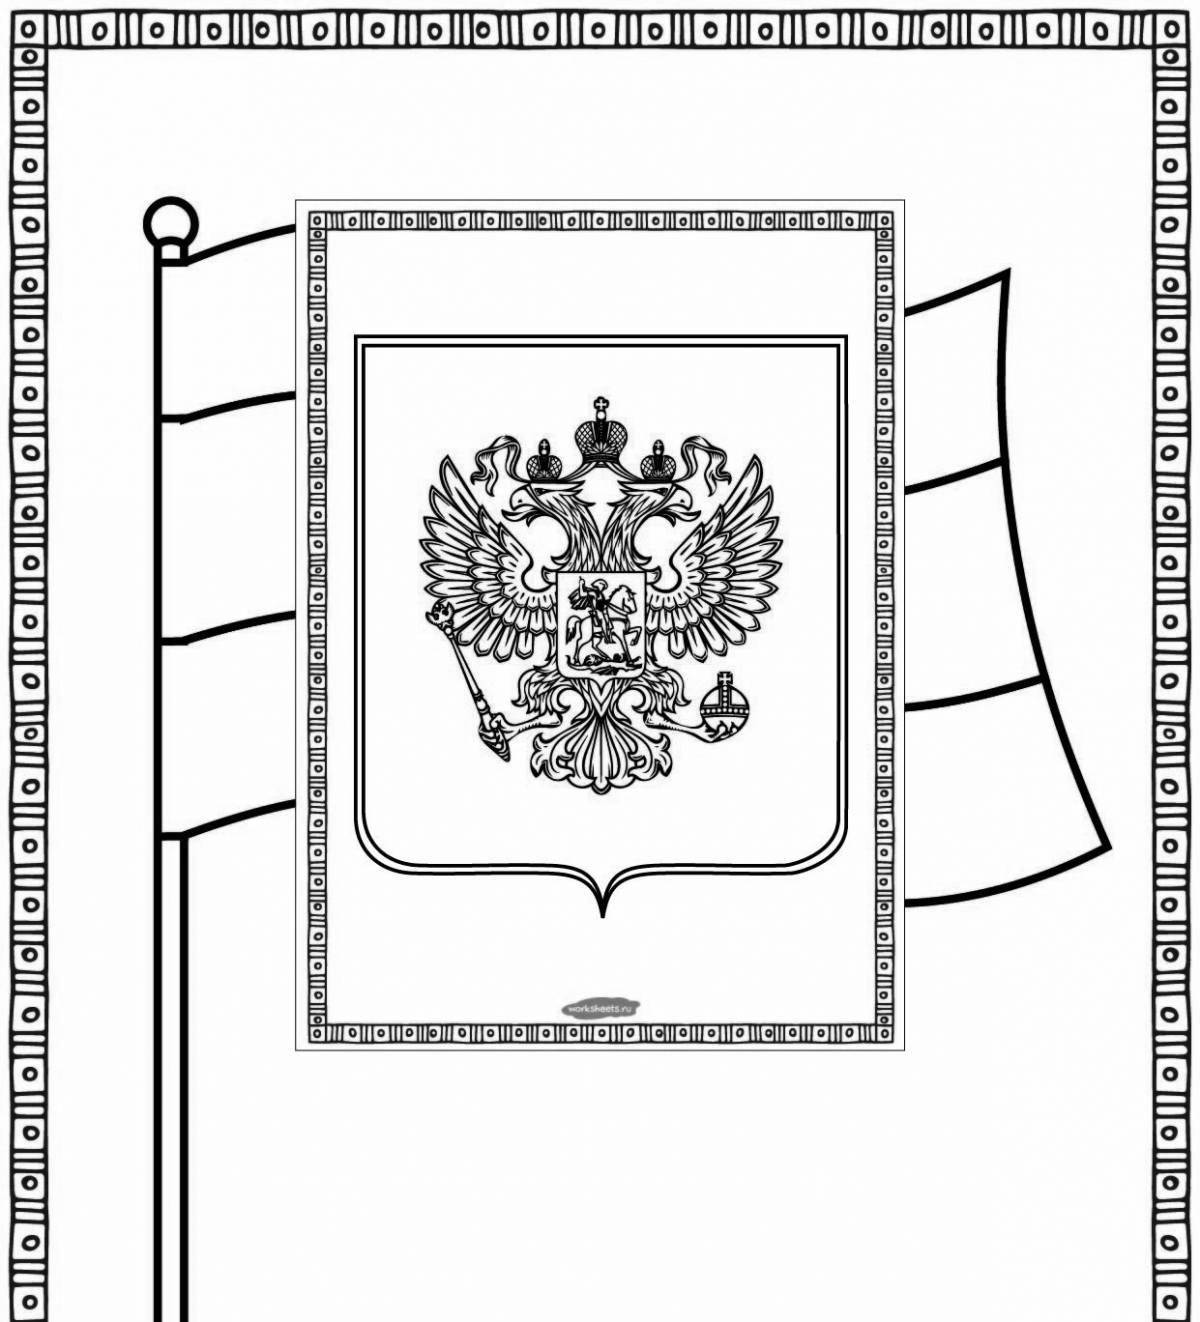 Coat of arms of moscow #4